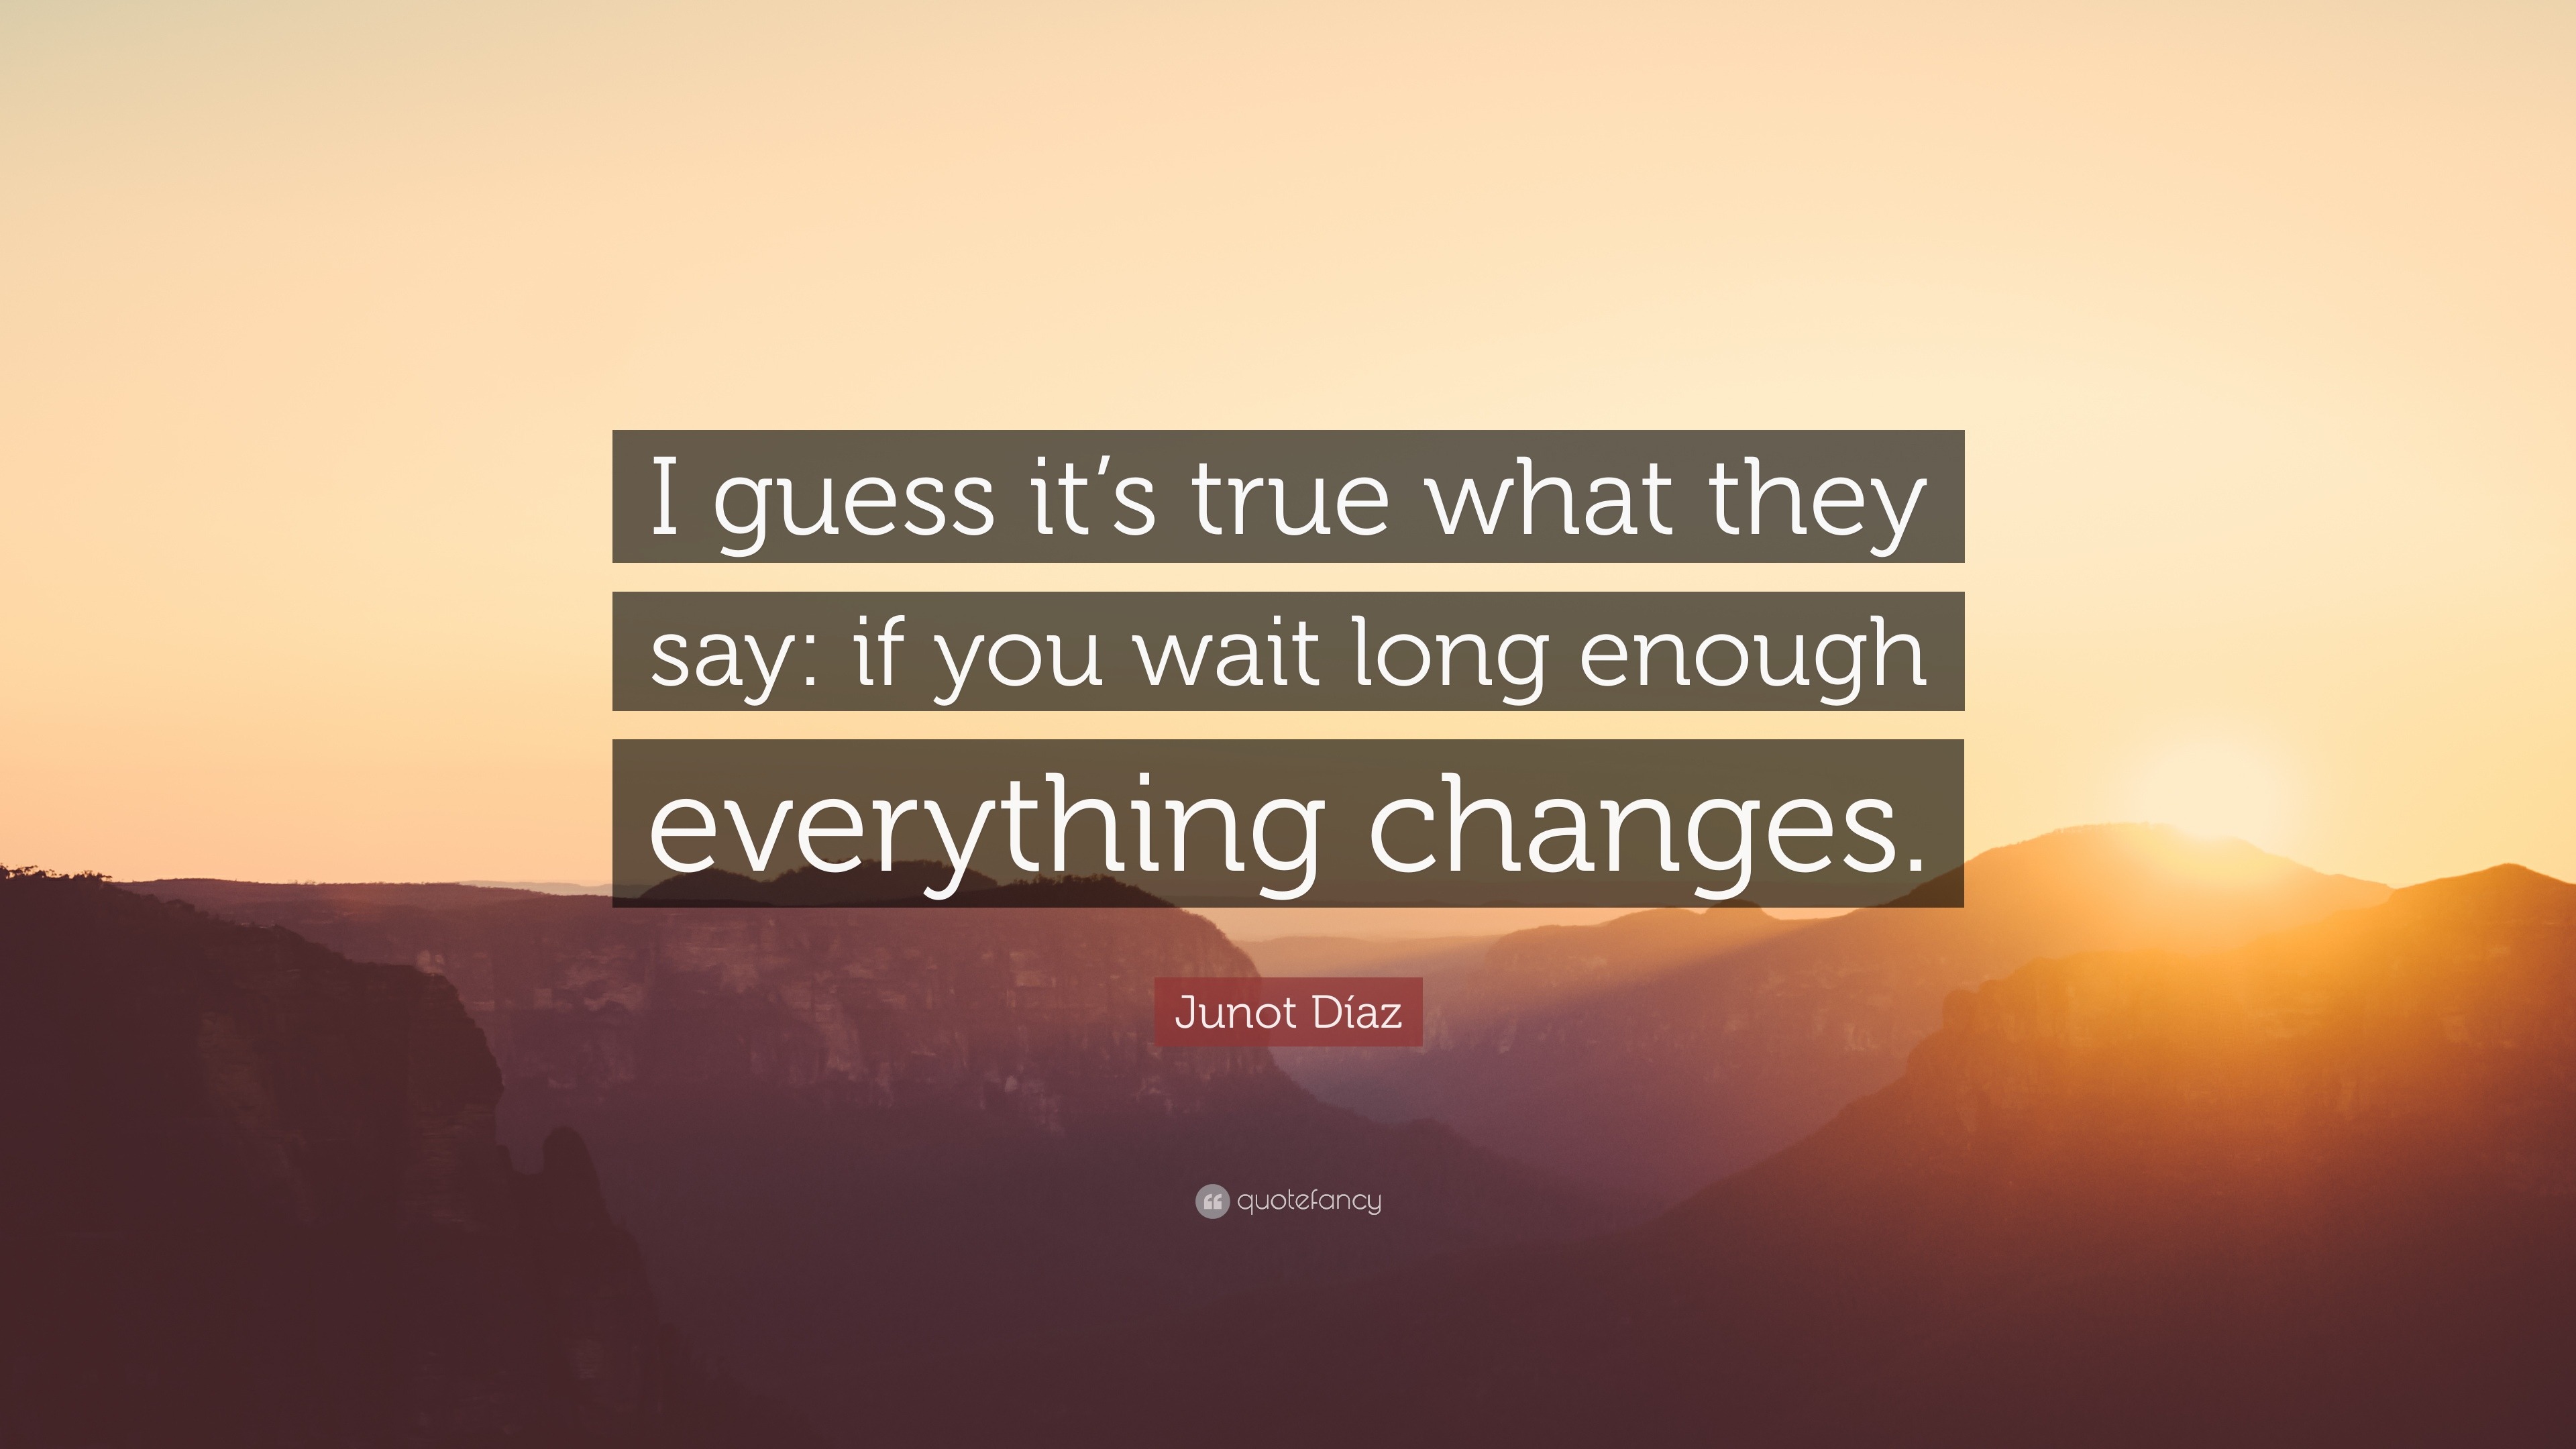 Junot Díaz Quote: “I guess it’s true what they say: if you wait long ...